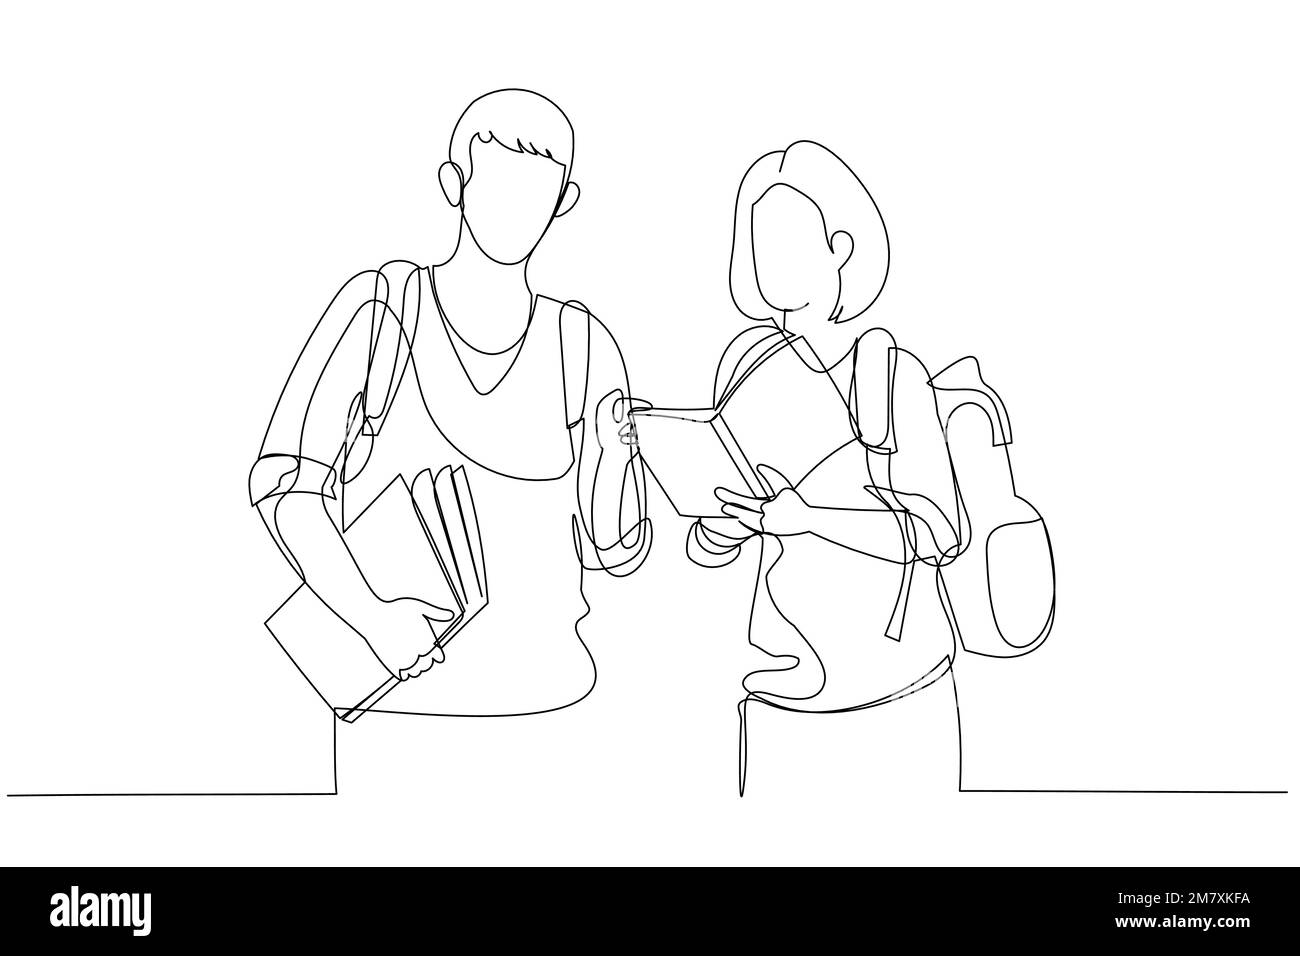 Illustration of male and female college student friends with backpacks holding books. Single line art style Stock Vector